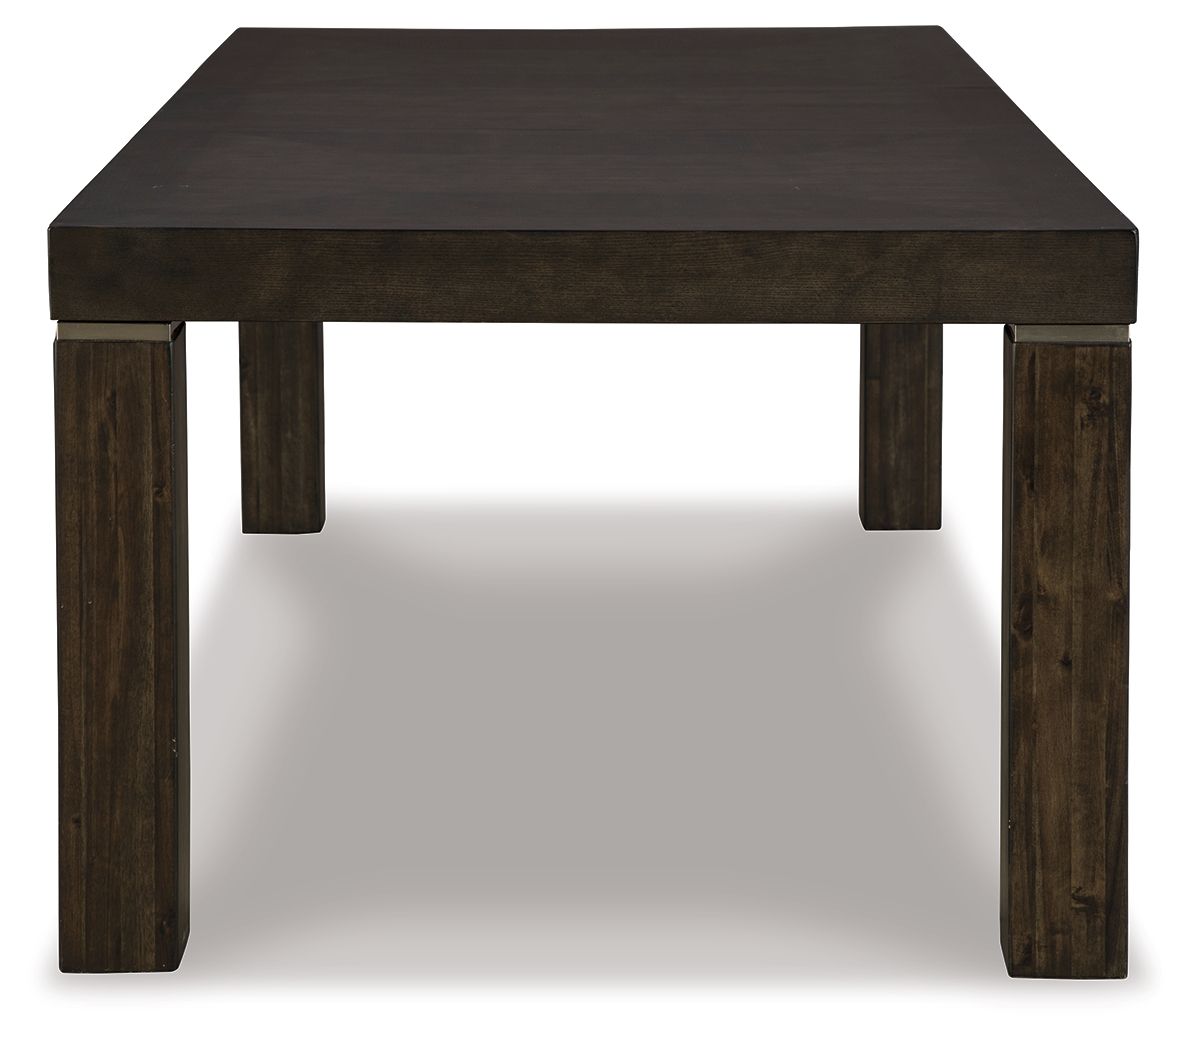 Hyndell - Dark Brown - Rect Dining Room Ext Table